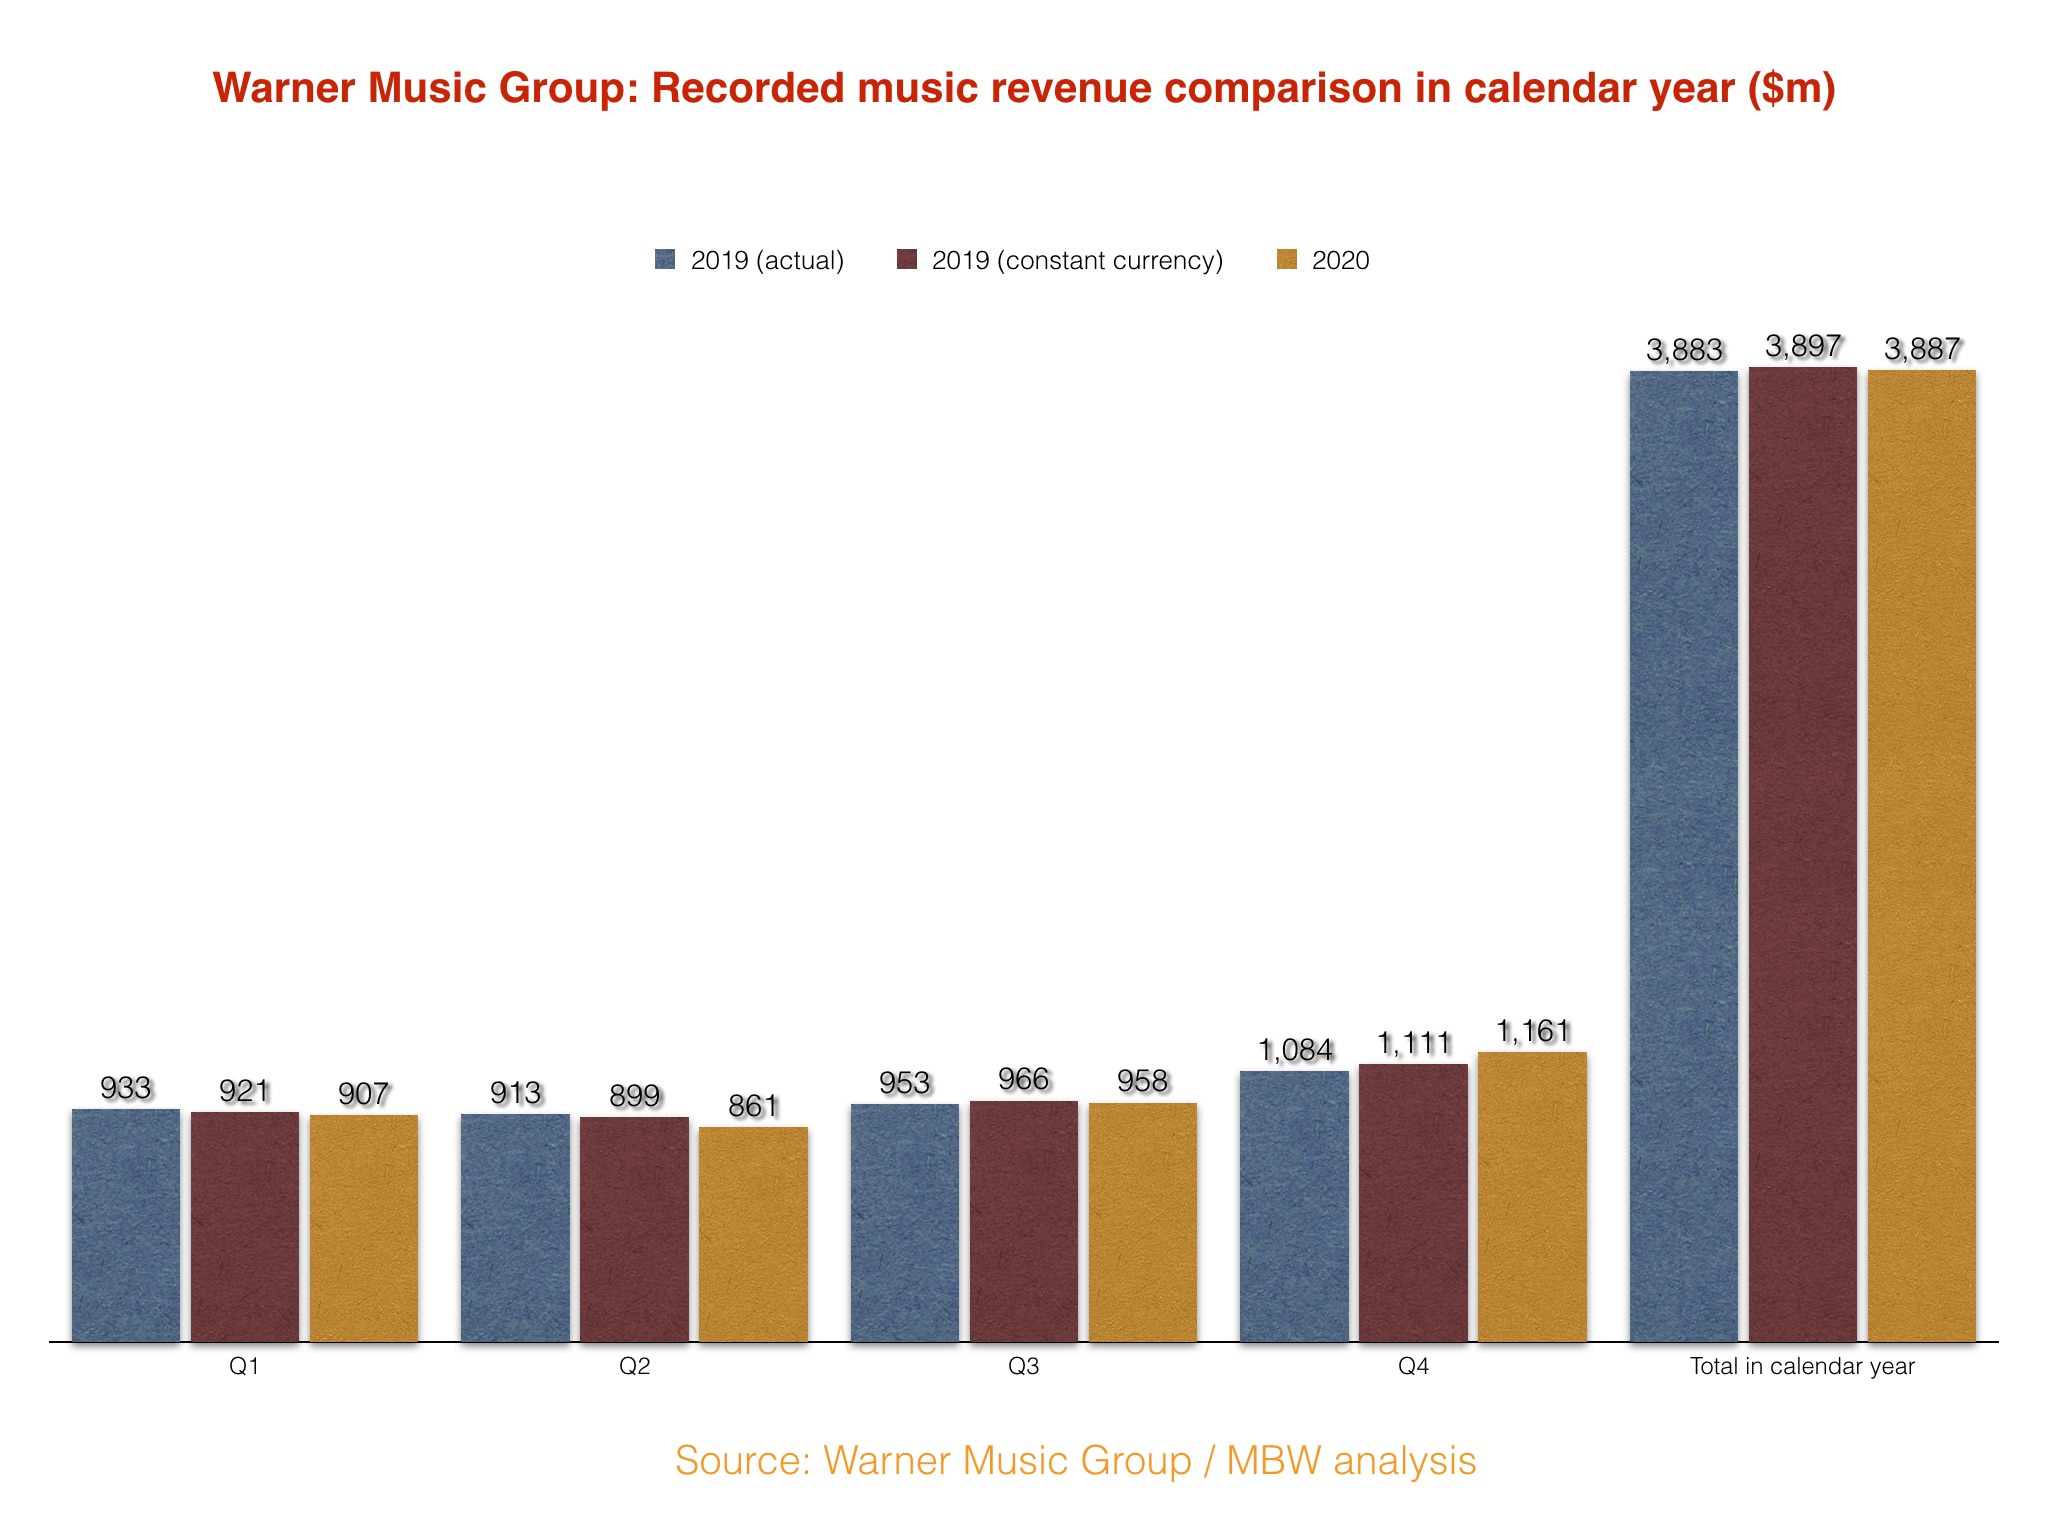 How did Warner Music Group perform in the pandemic year of 2020